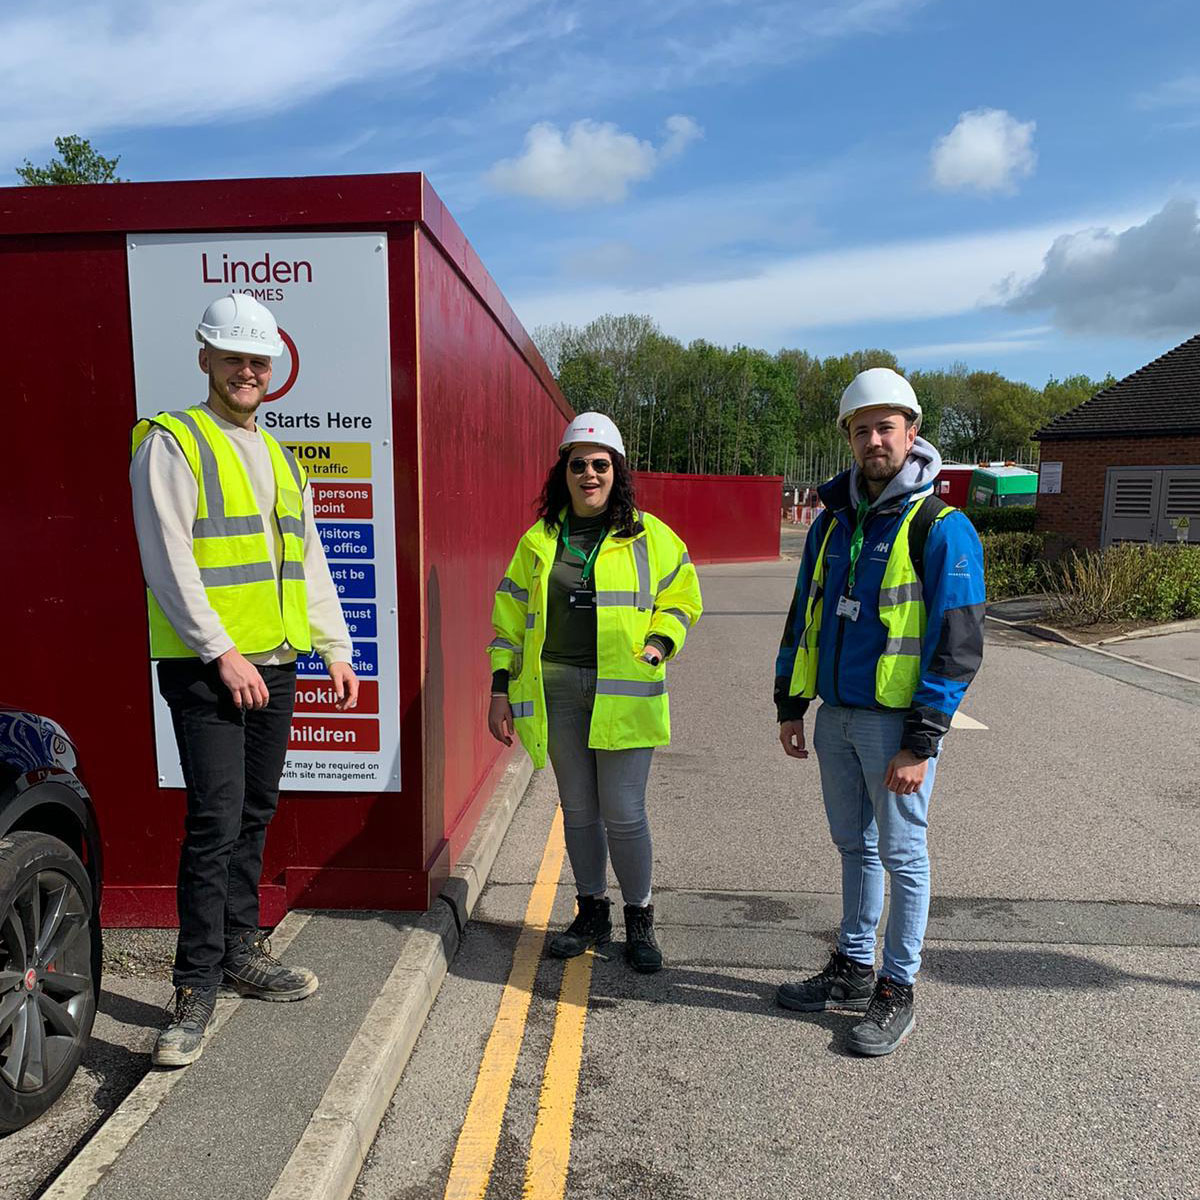 Quantity Surveying students at East Surrey College visit a Linden Homes site.